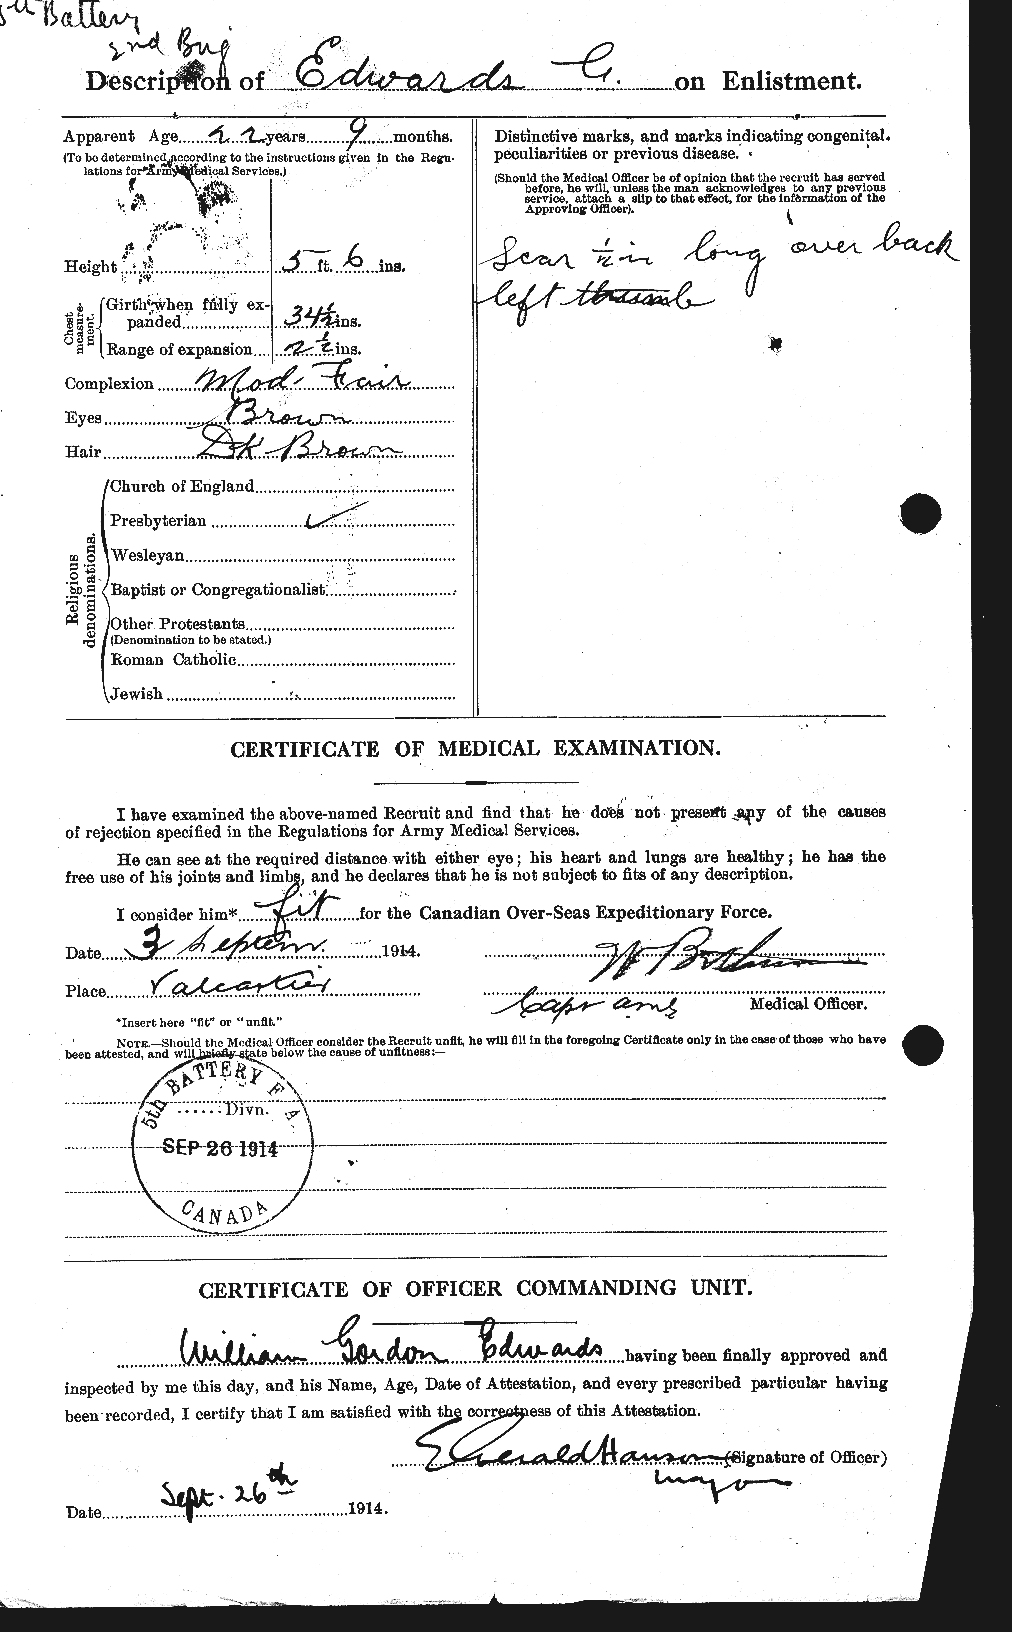 Personnel Records of the First World War - CEF 310426b